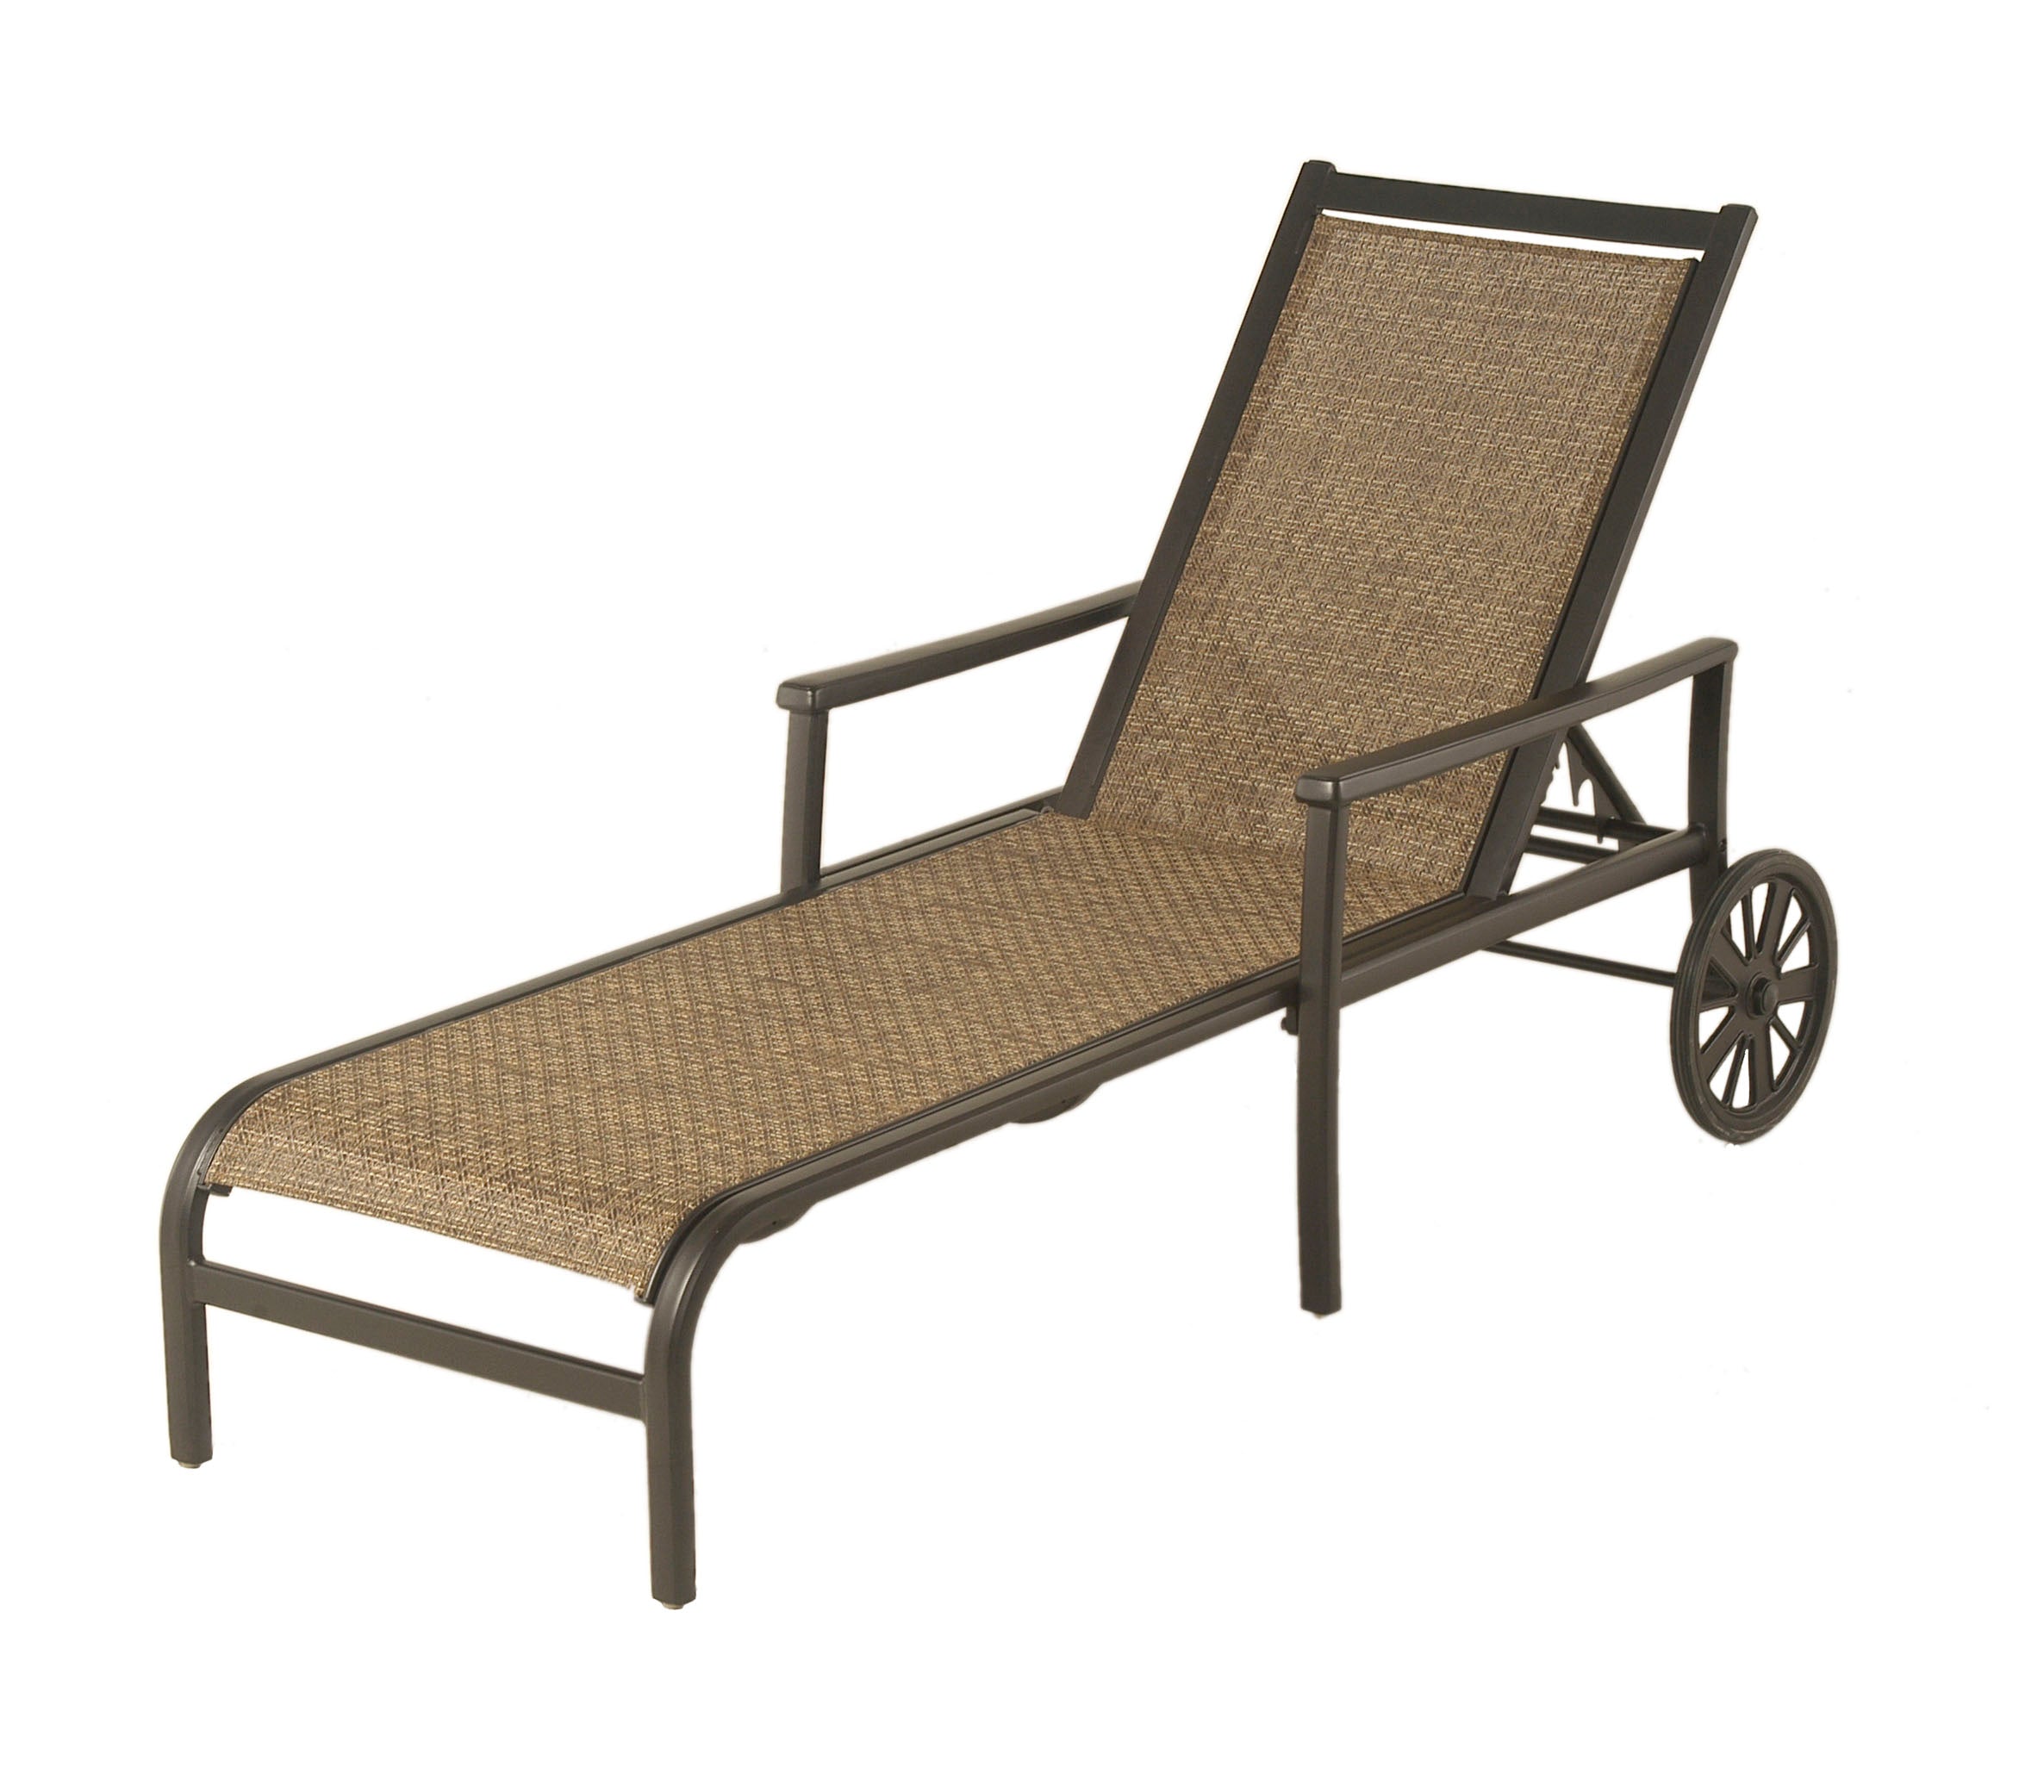 Stratford Sling Chaise Lounger by Hanamint